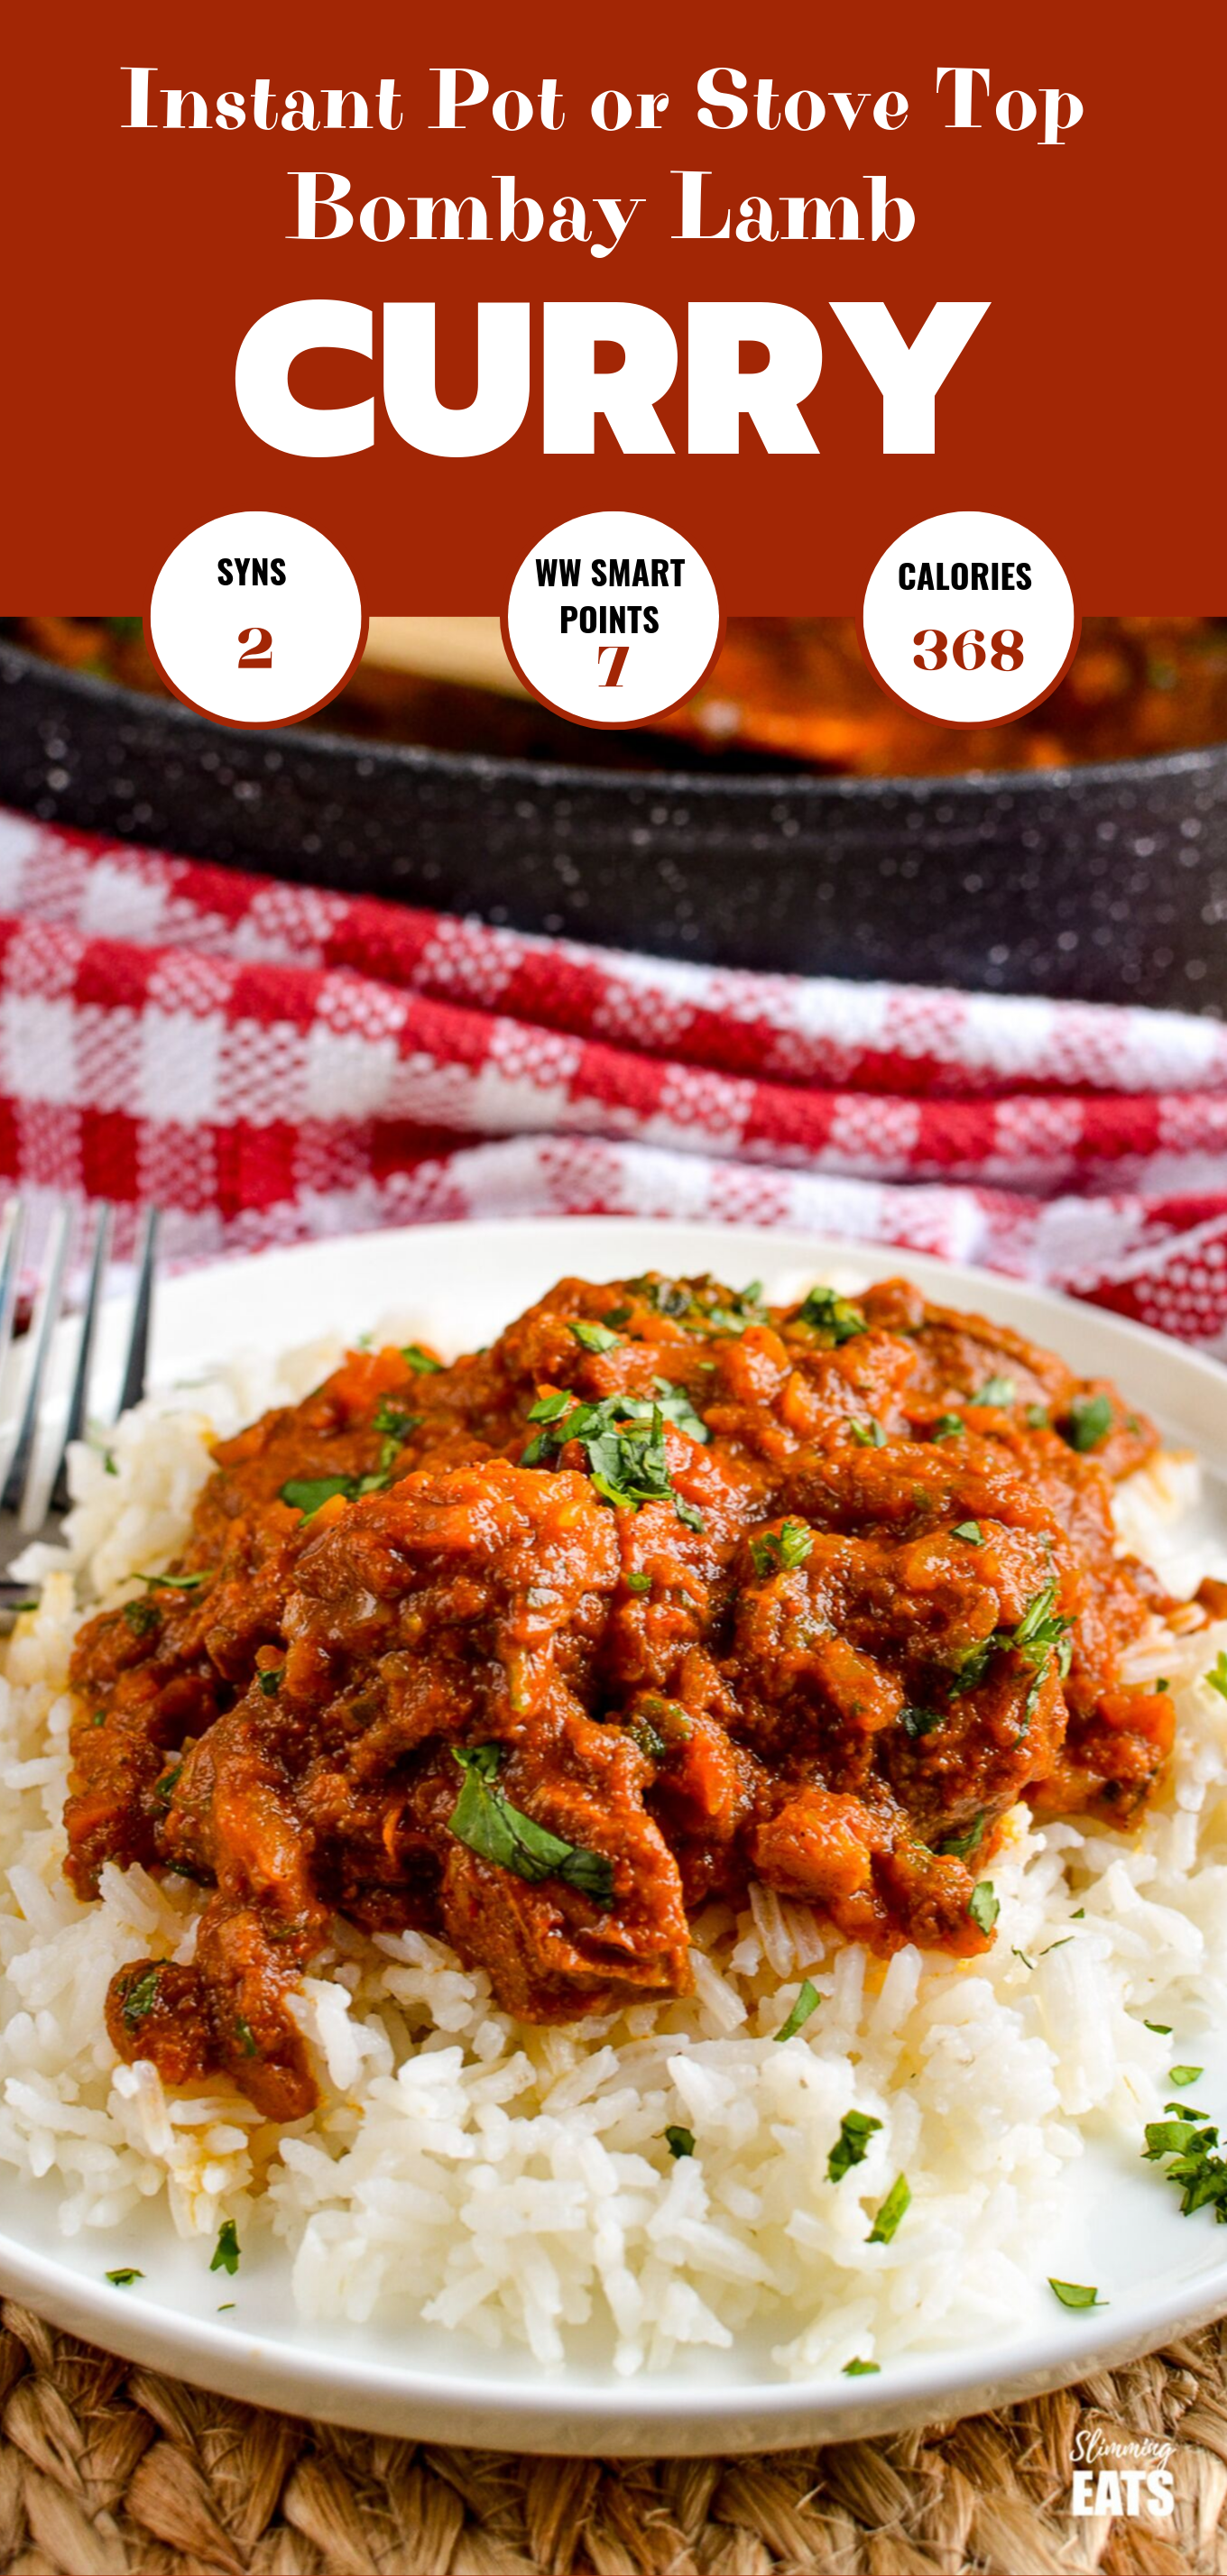 Bombay Lamb Curry feature pin image